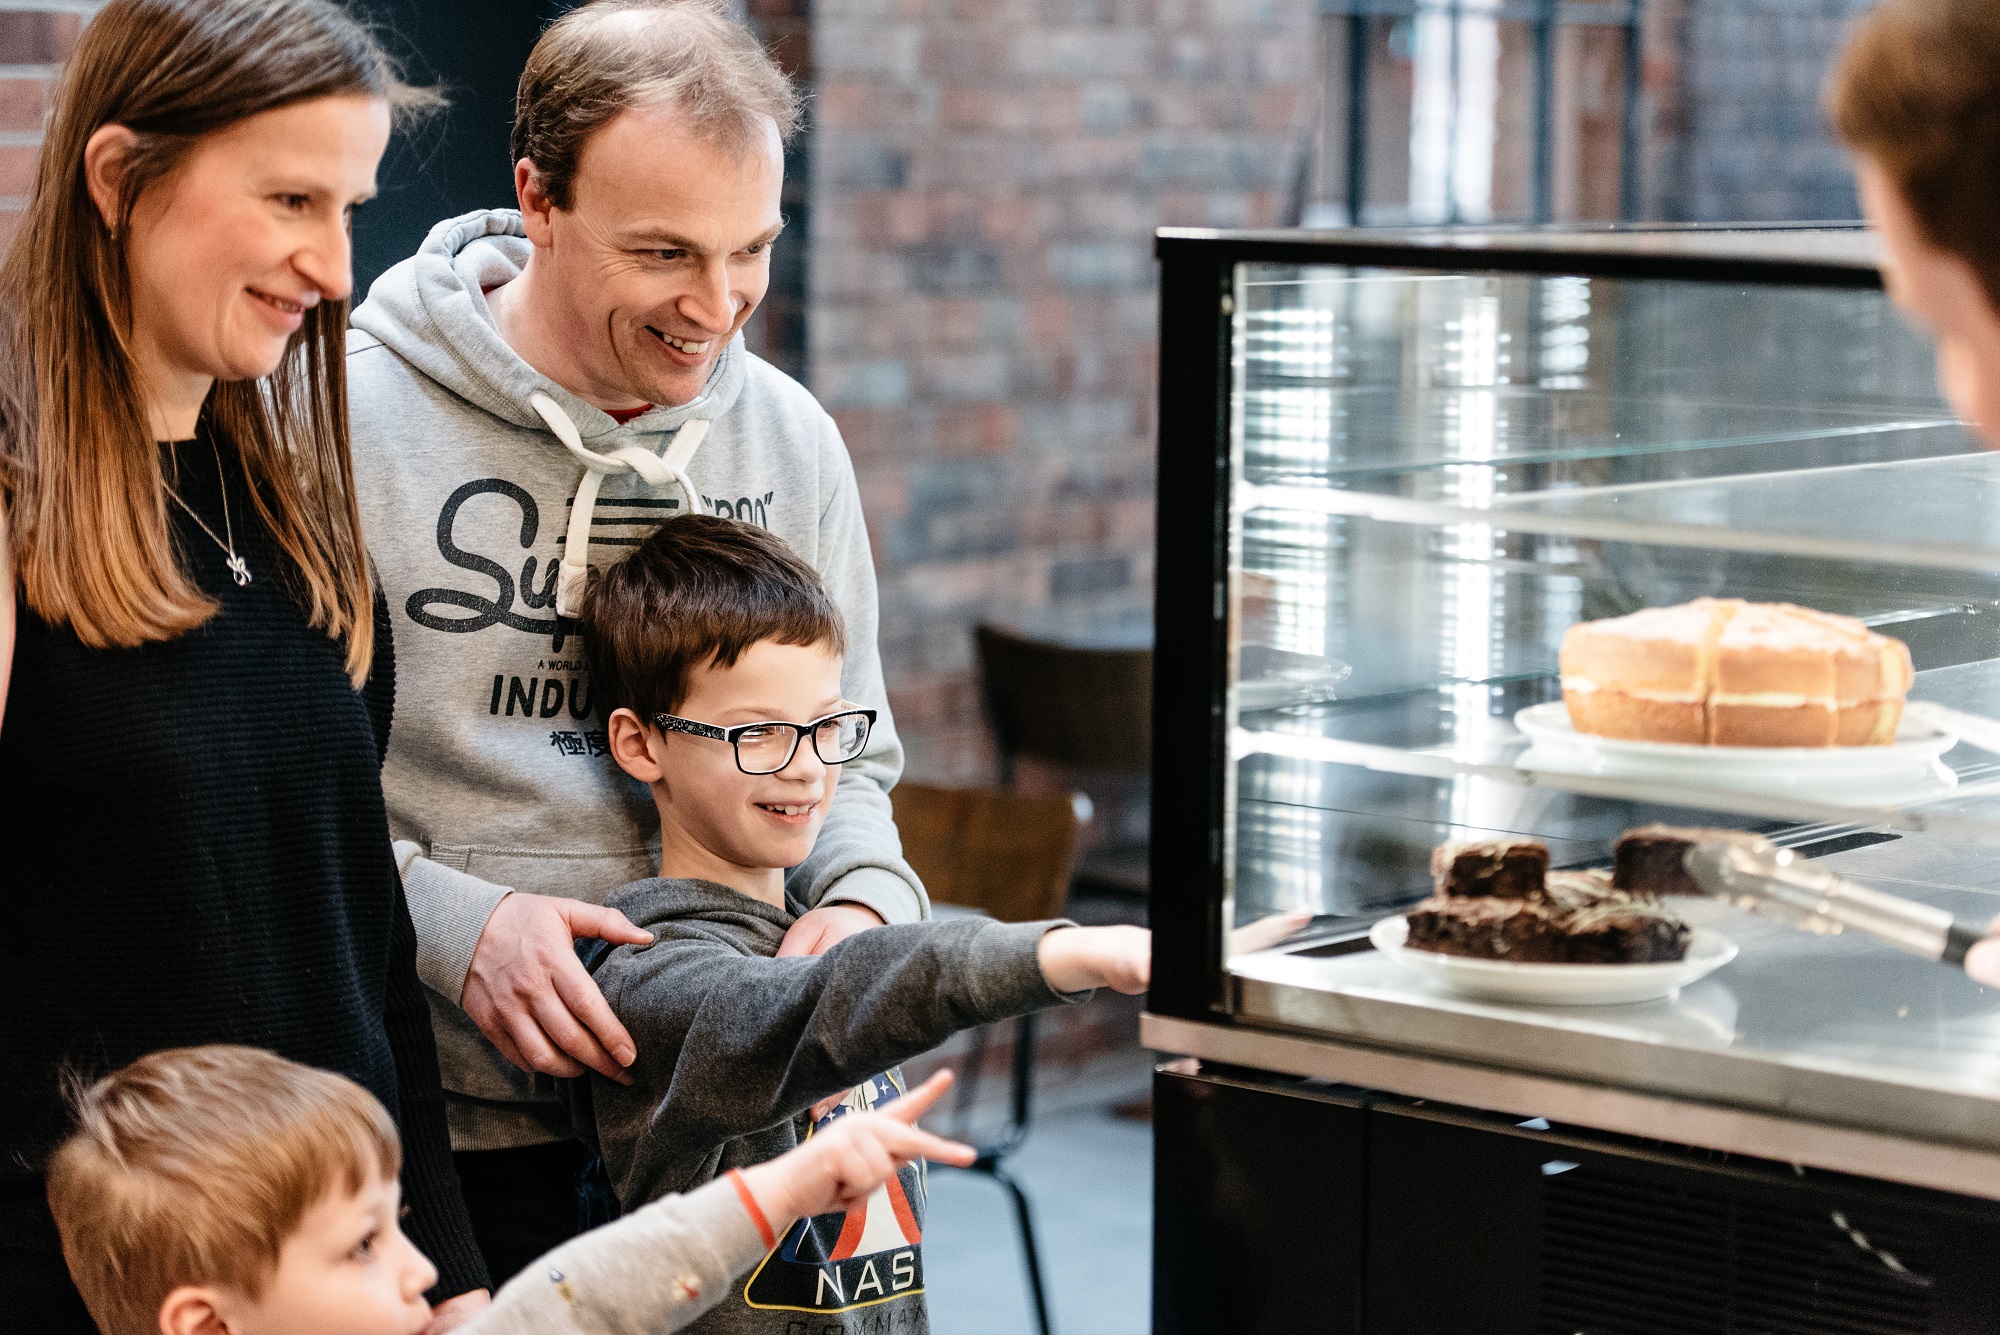 A family stand in front of a cake case at the museum of making with two young boys point at the cake.